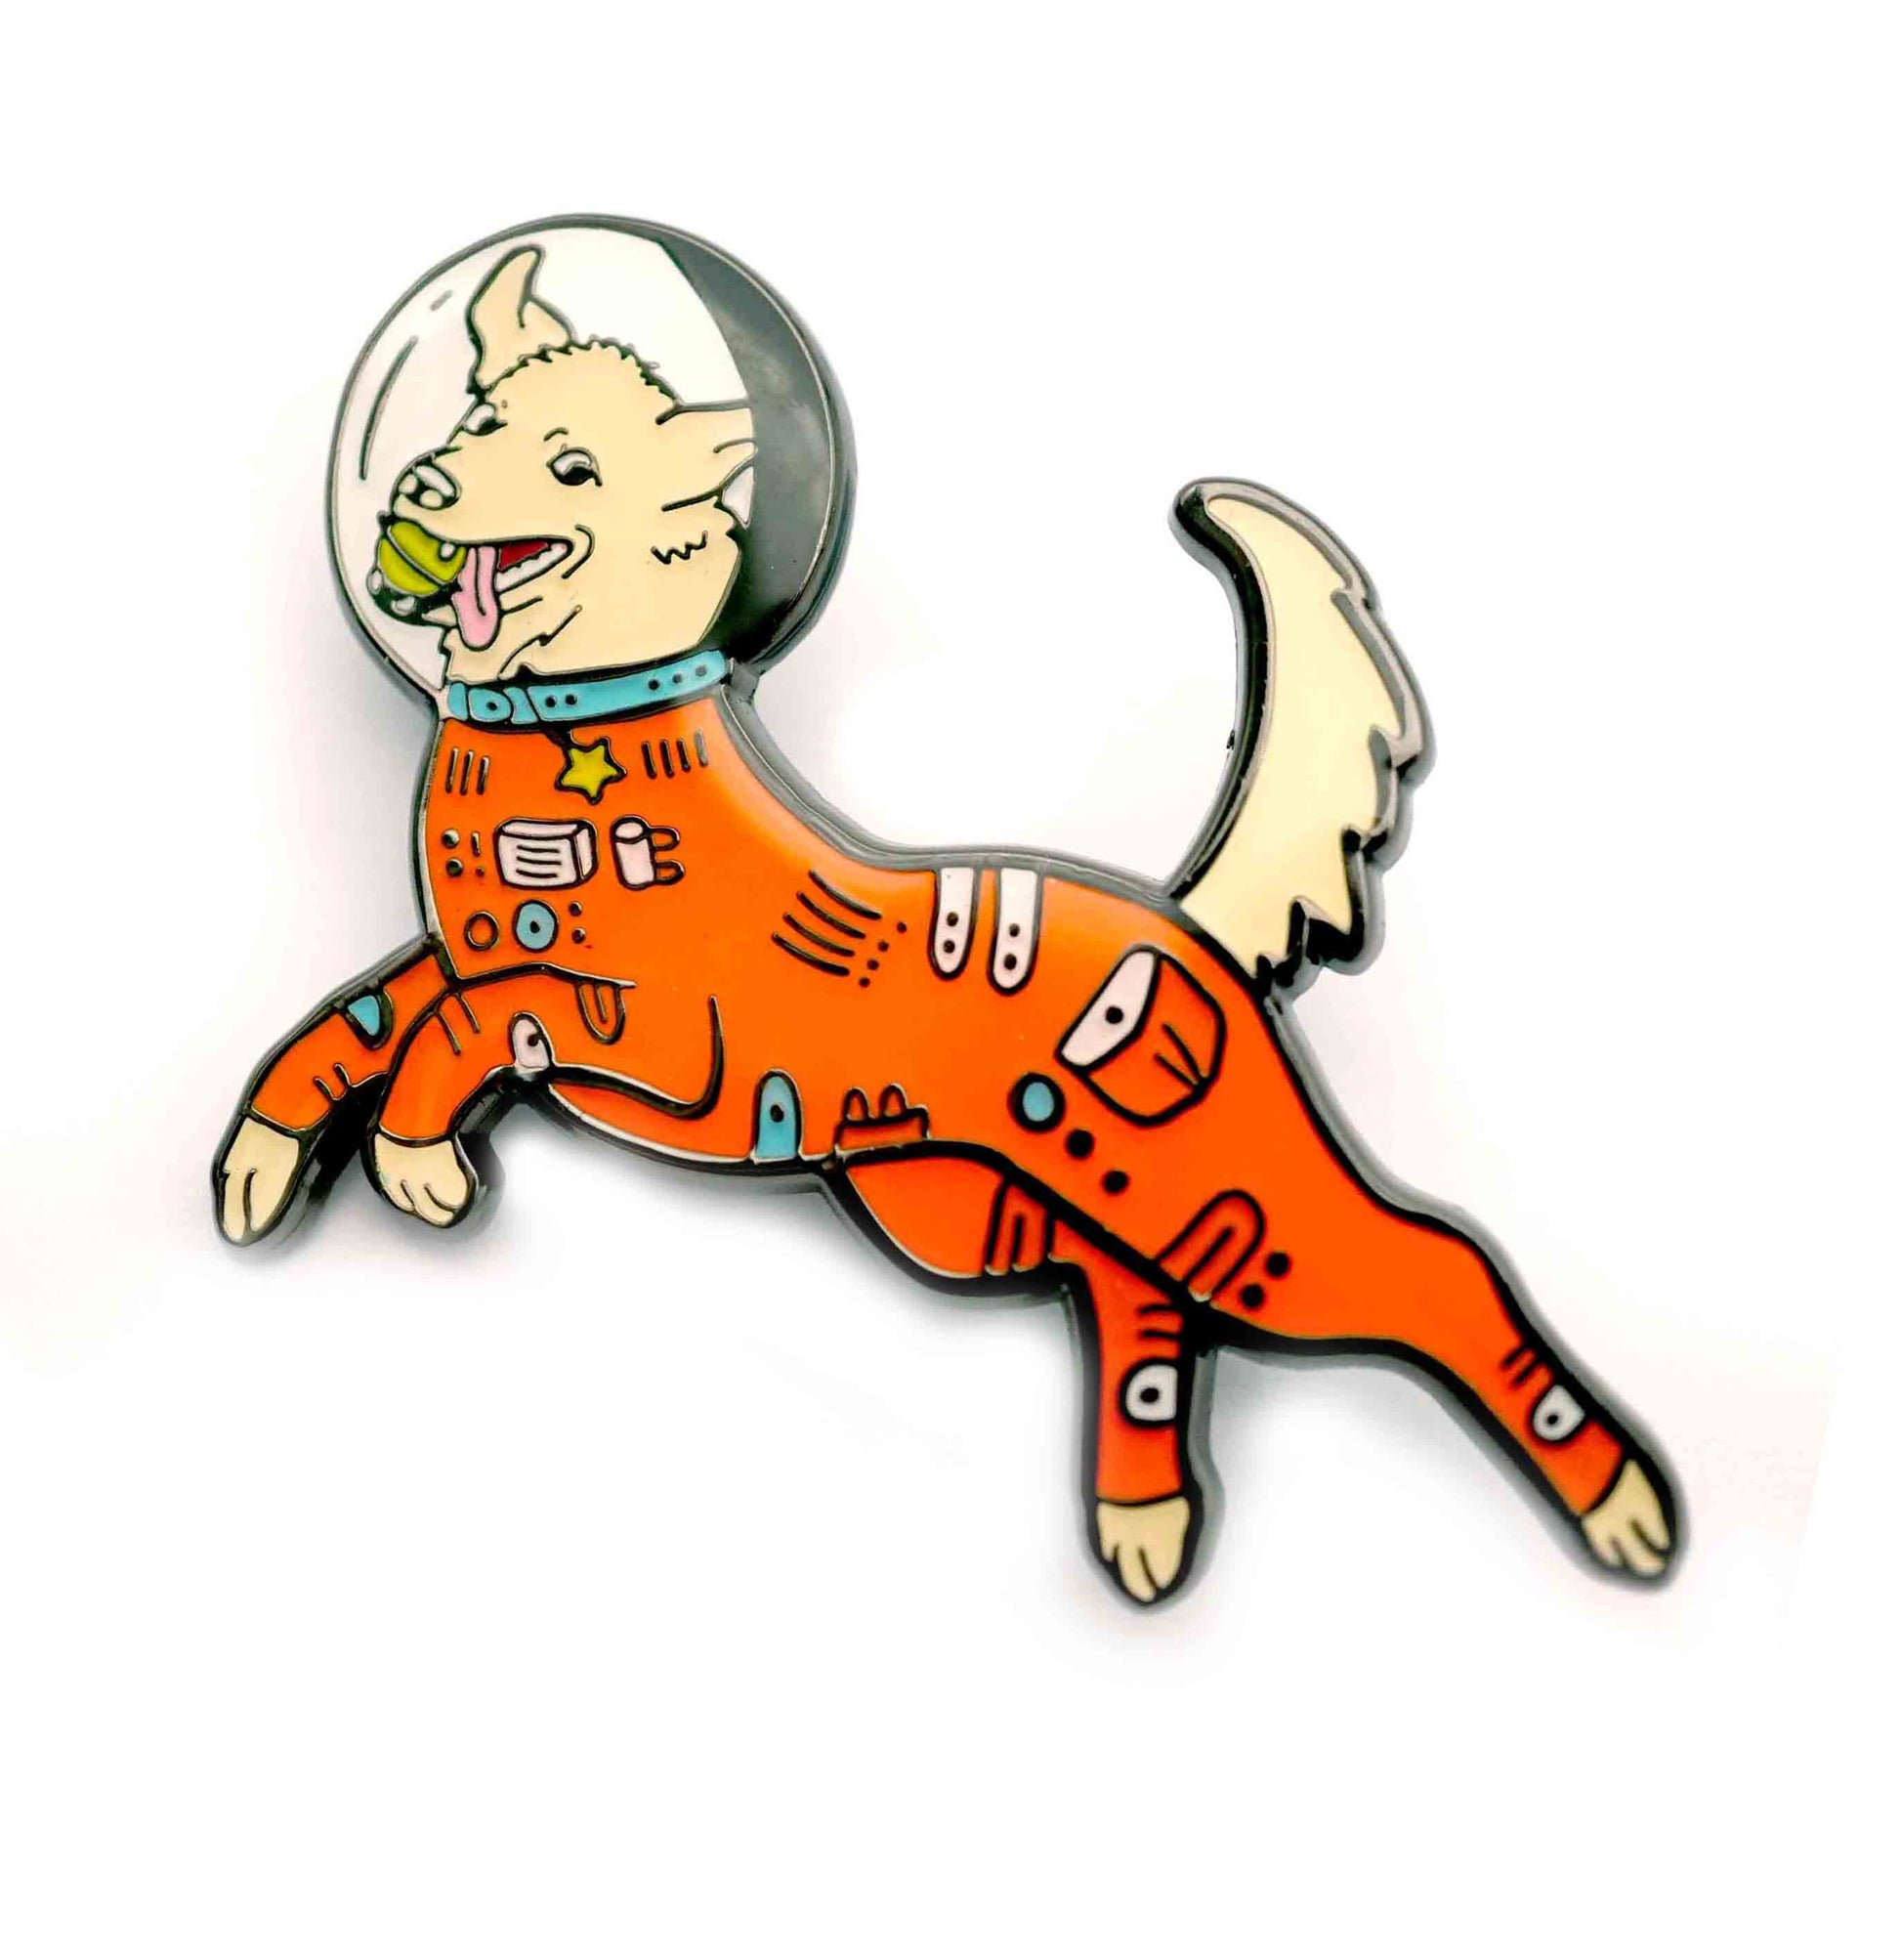 mission space dog enamel pin compoco silver color plating astronaut space unique fun cute  spacesuit space helmet nickel free zinc hard enamel sturdy stylish pins dog dogs doggo puppy puppies pups pooche 